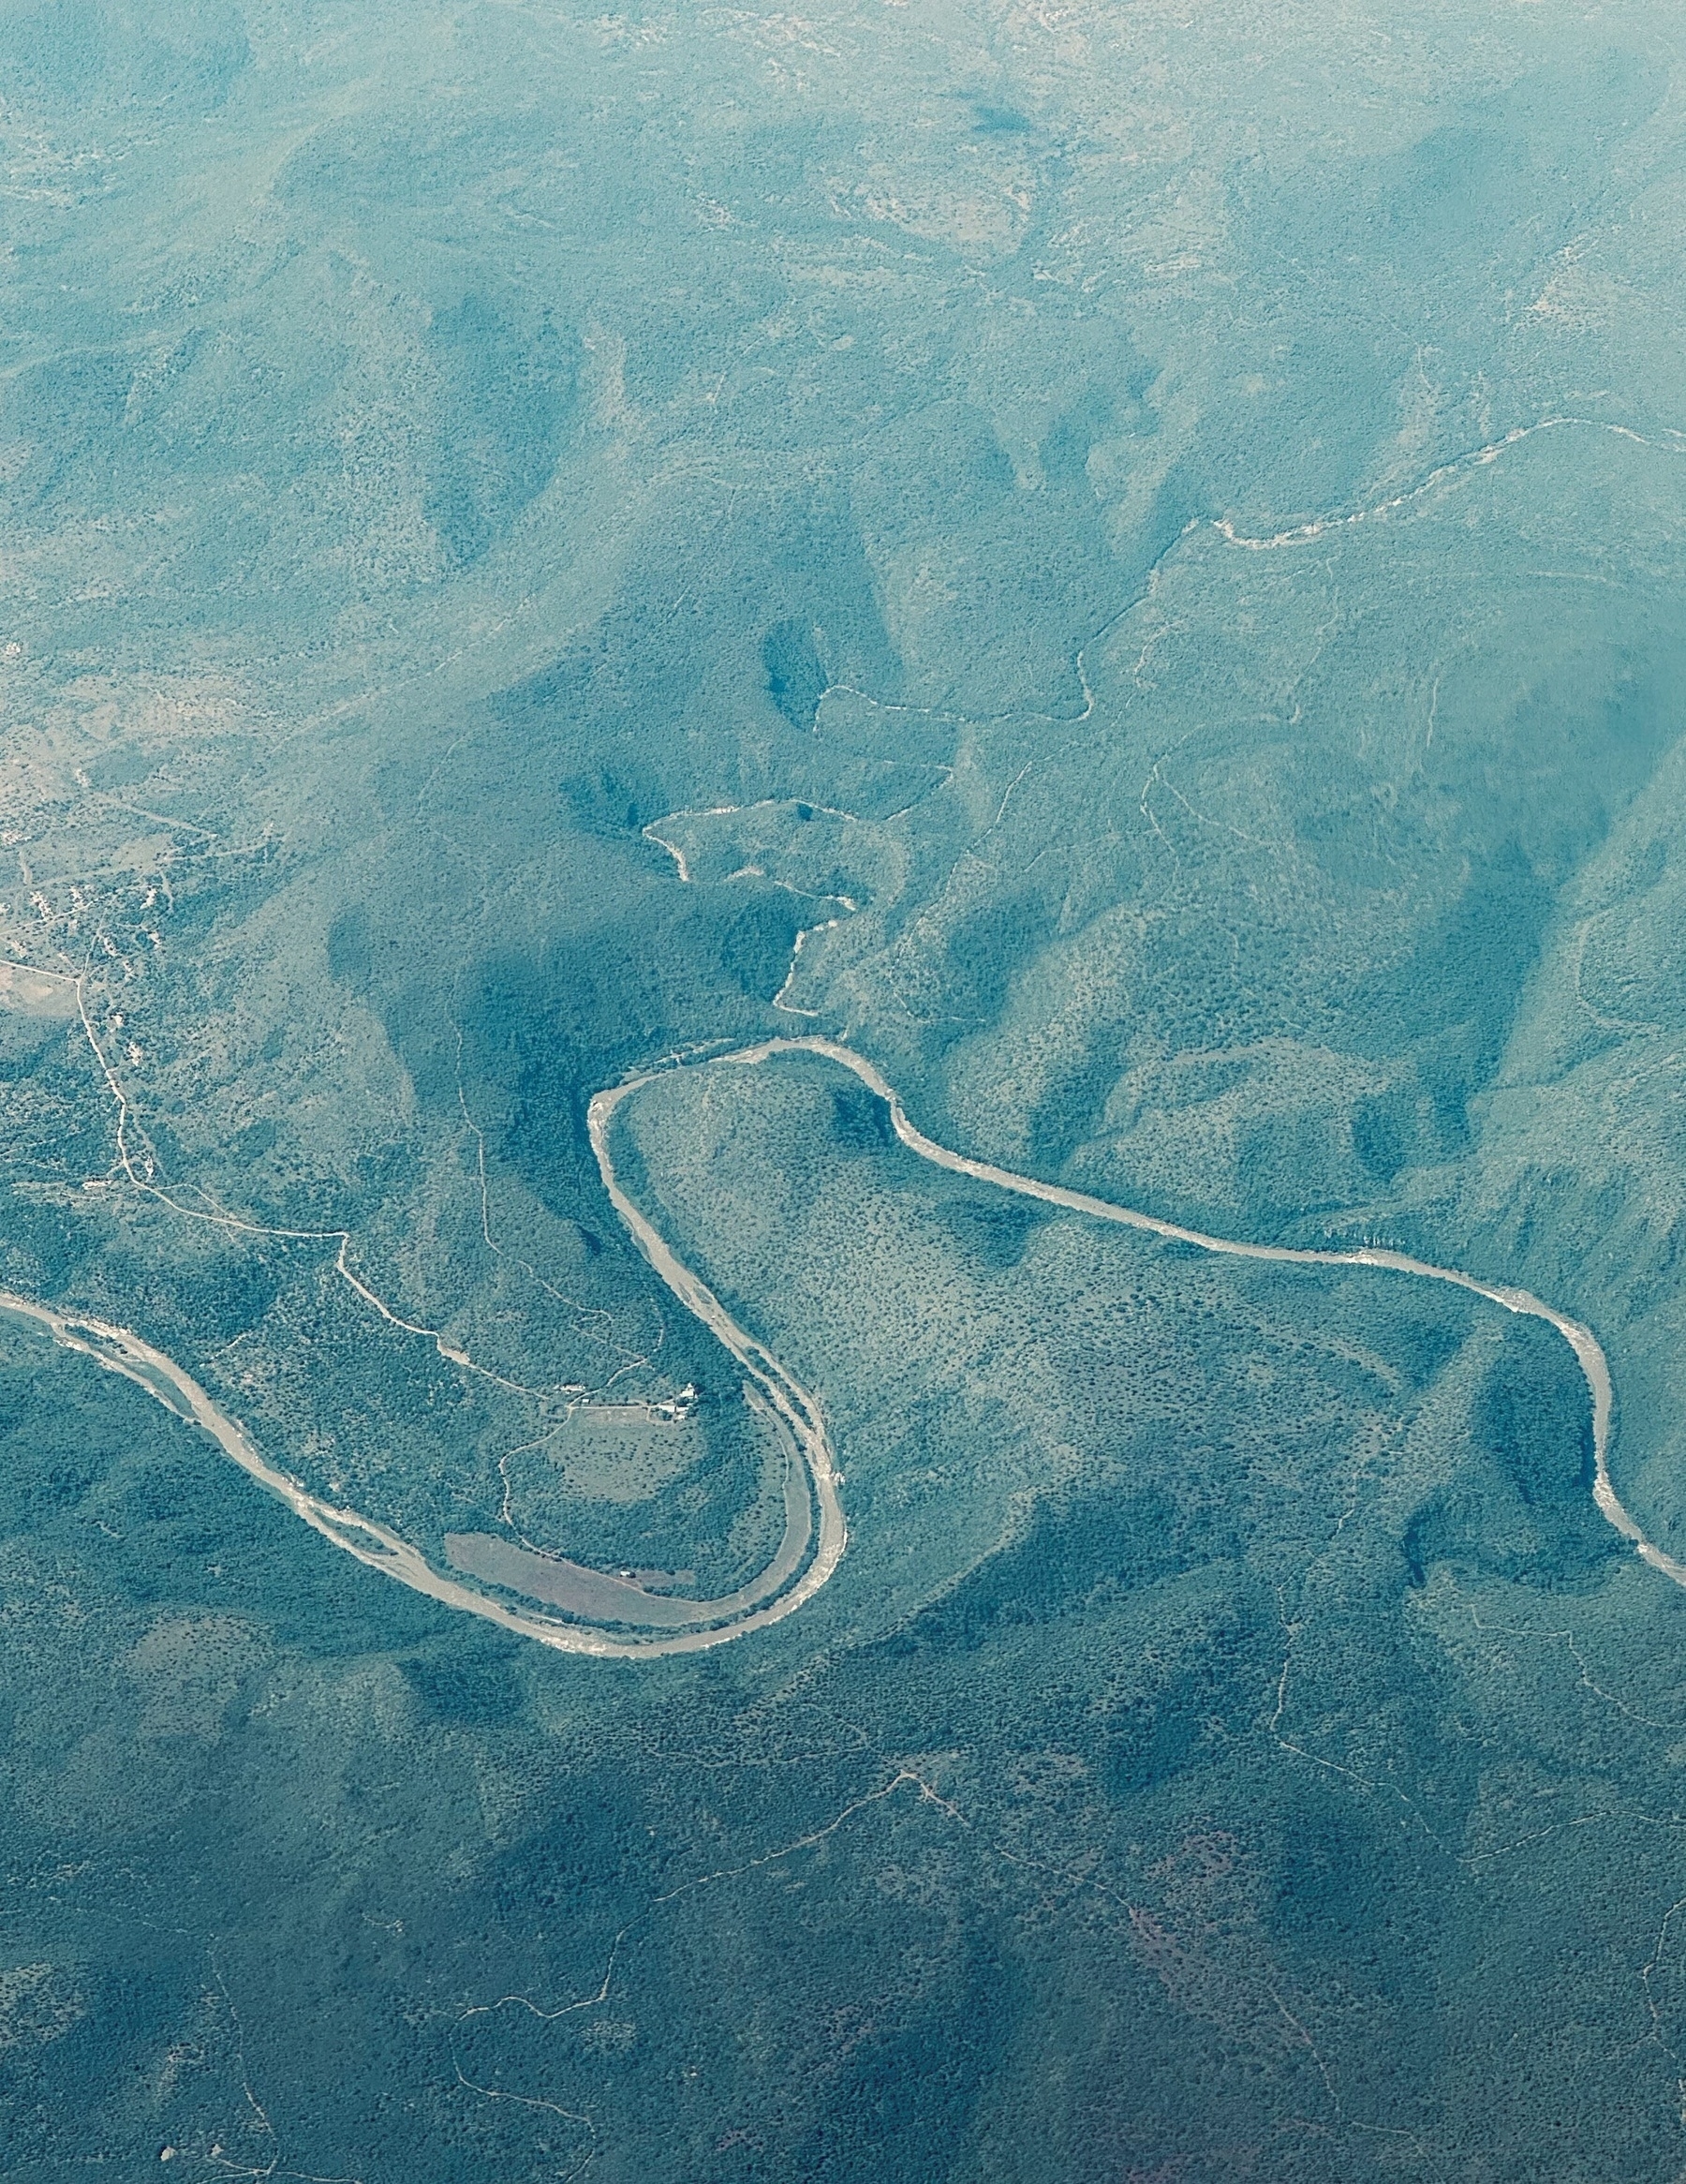 A river winding through hills, seen from the air.